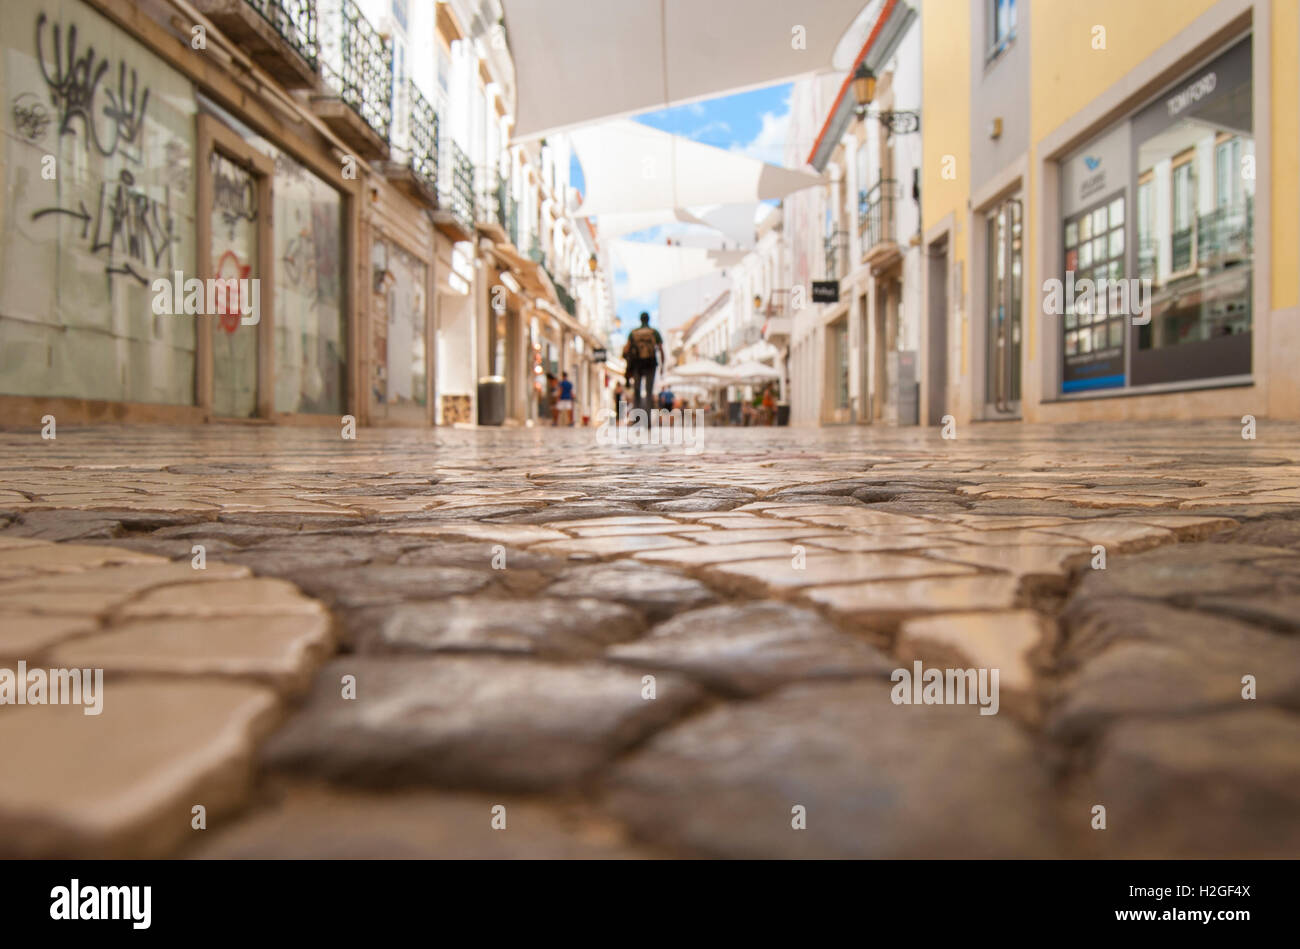 Capturing the old town of Faro, Portugal - down low. Stock Photo